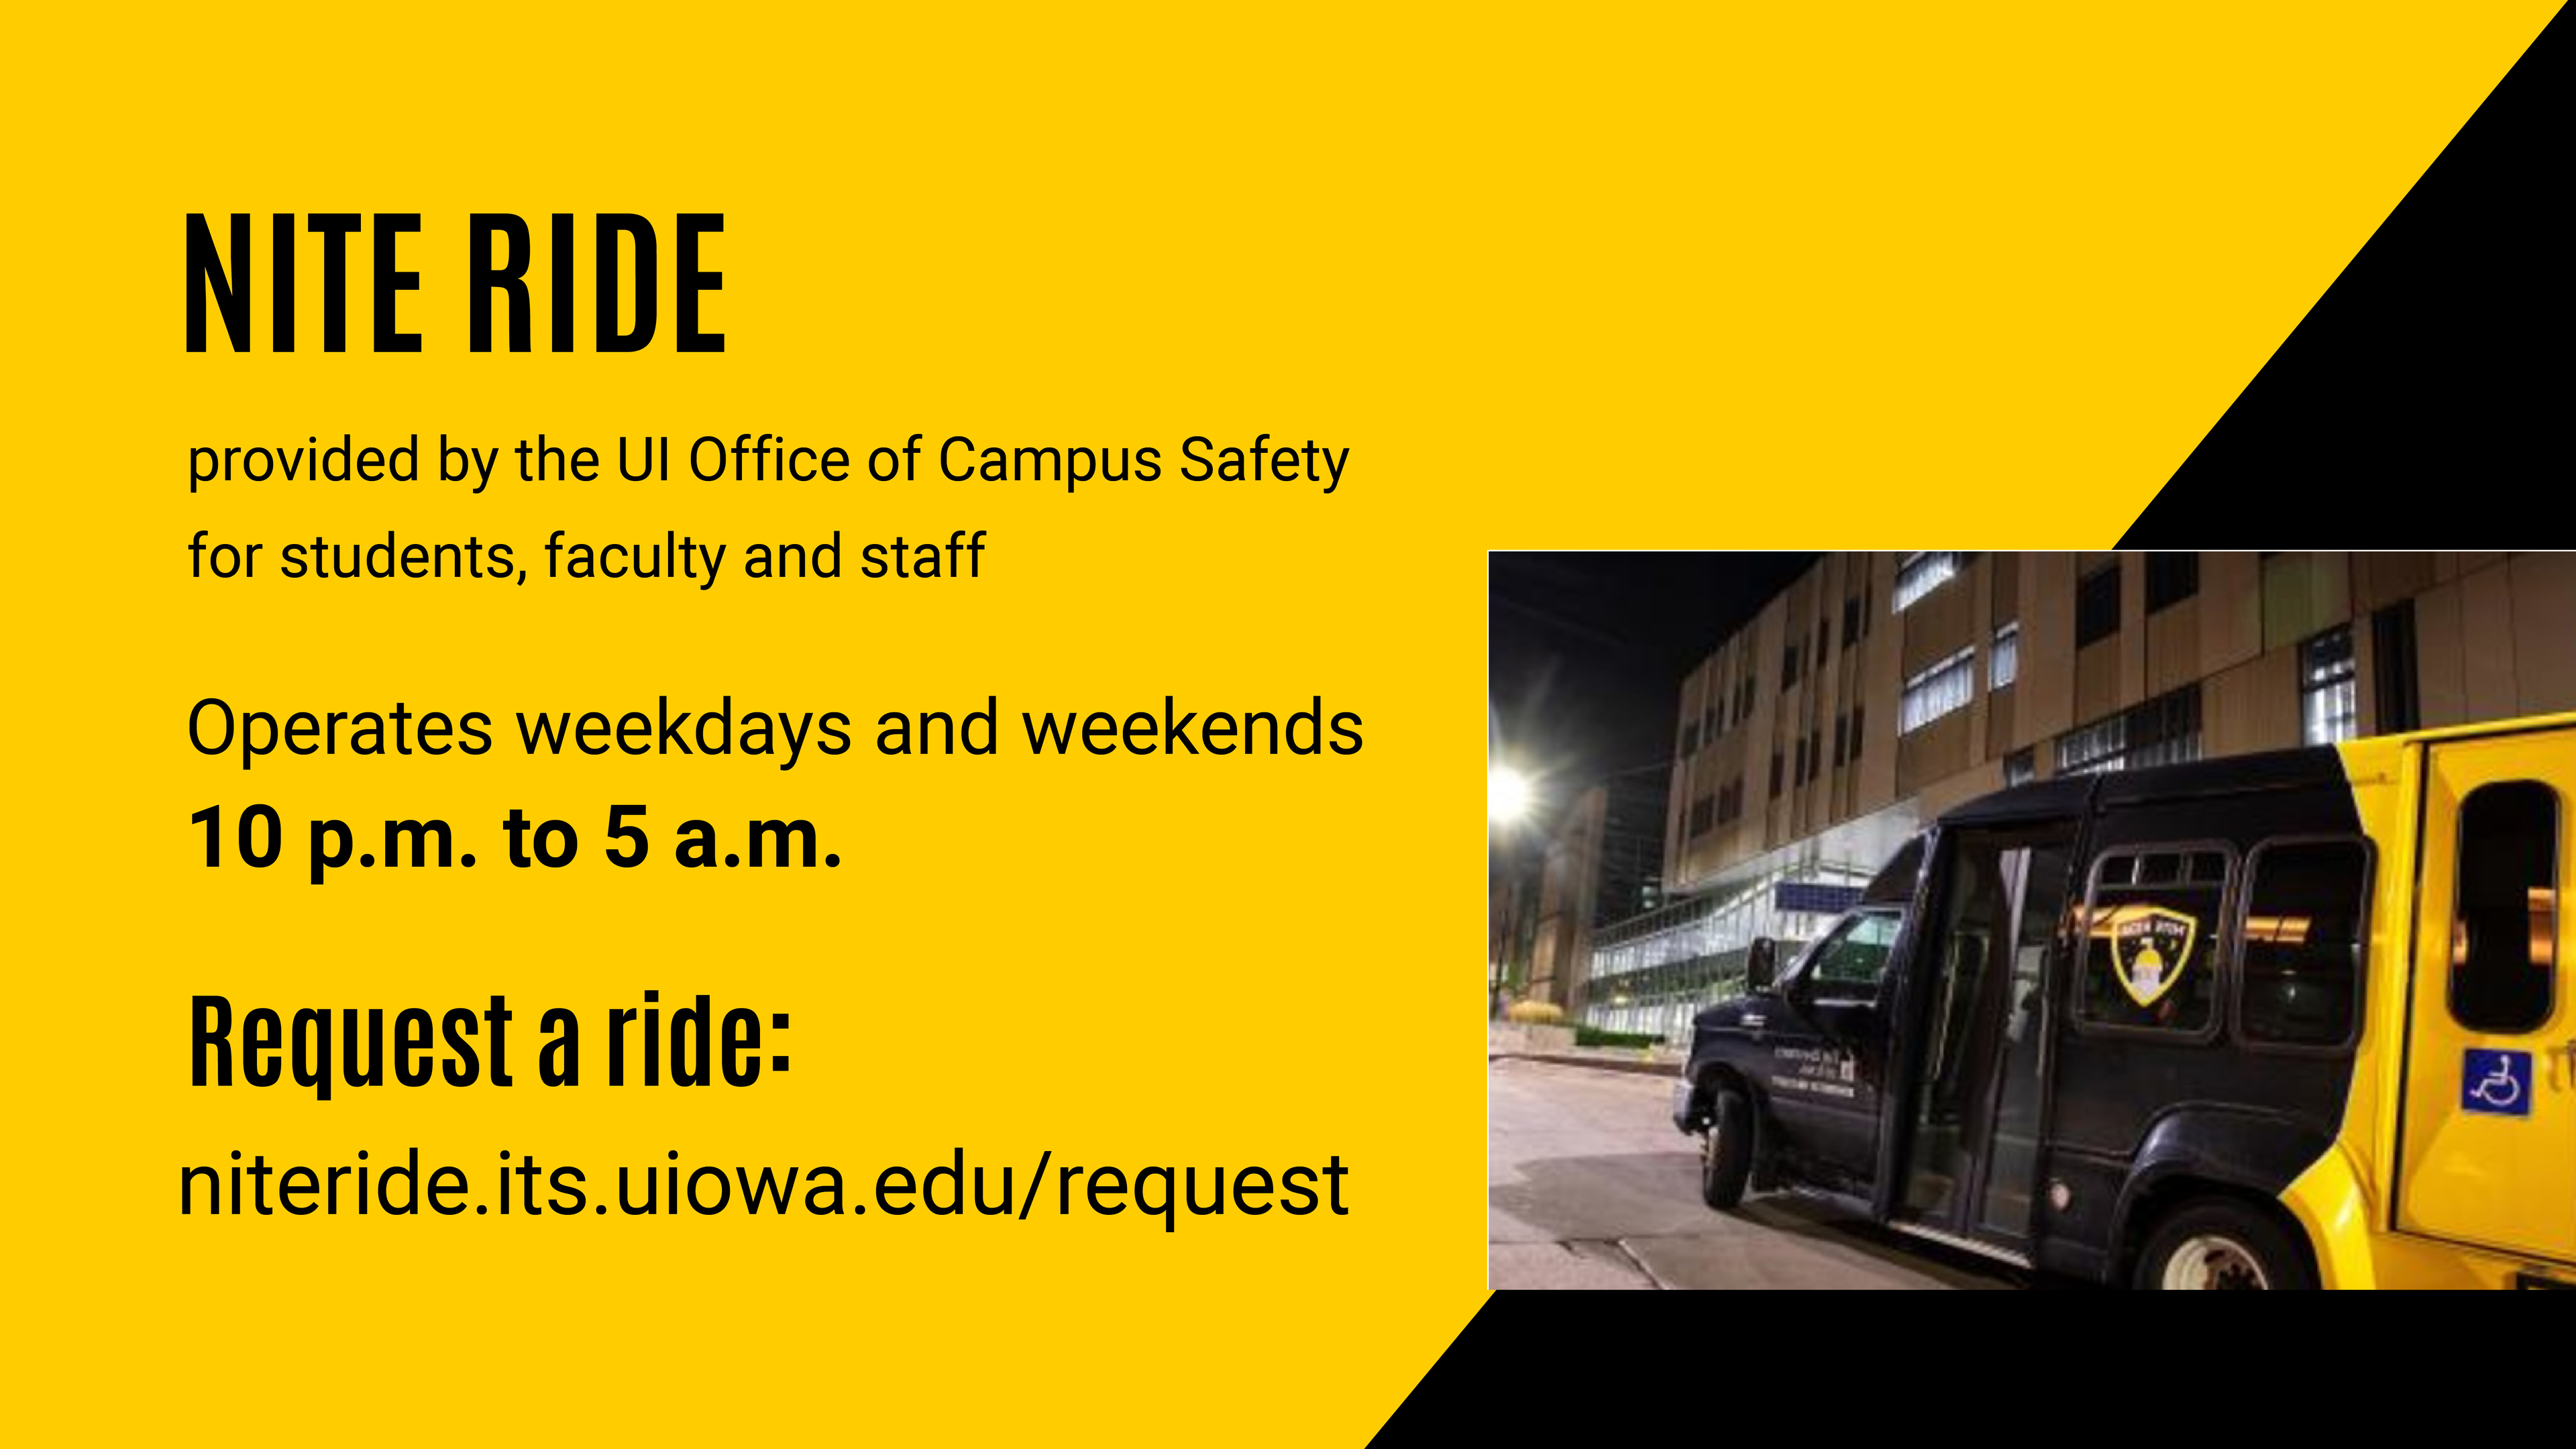 Information on Nite Ride services provided by the UI Office of Campus Safety